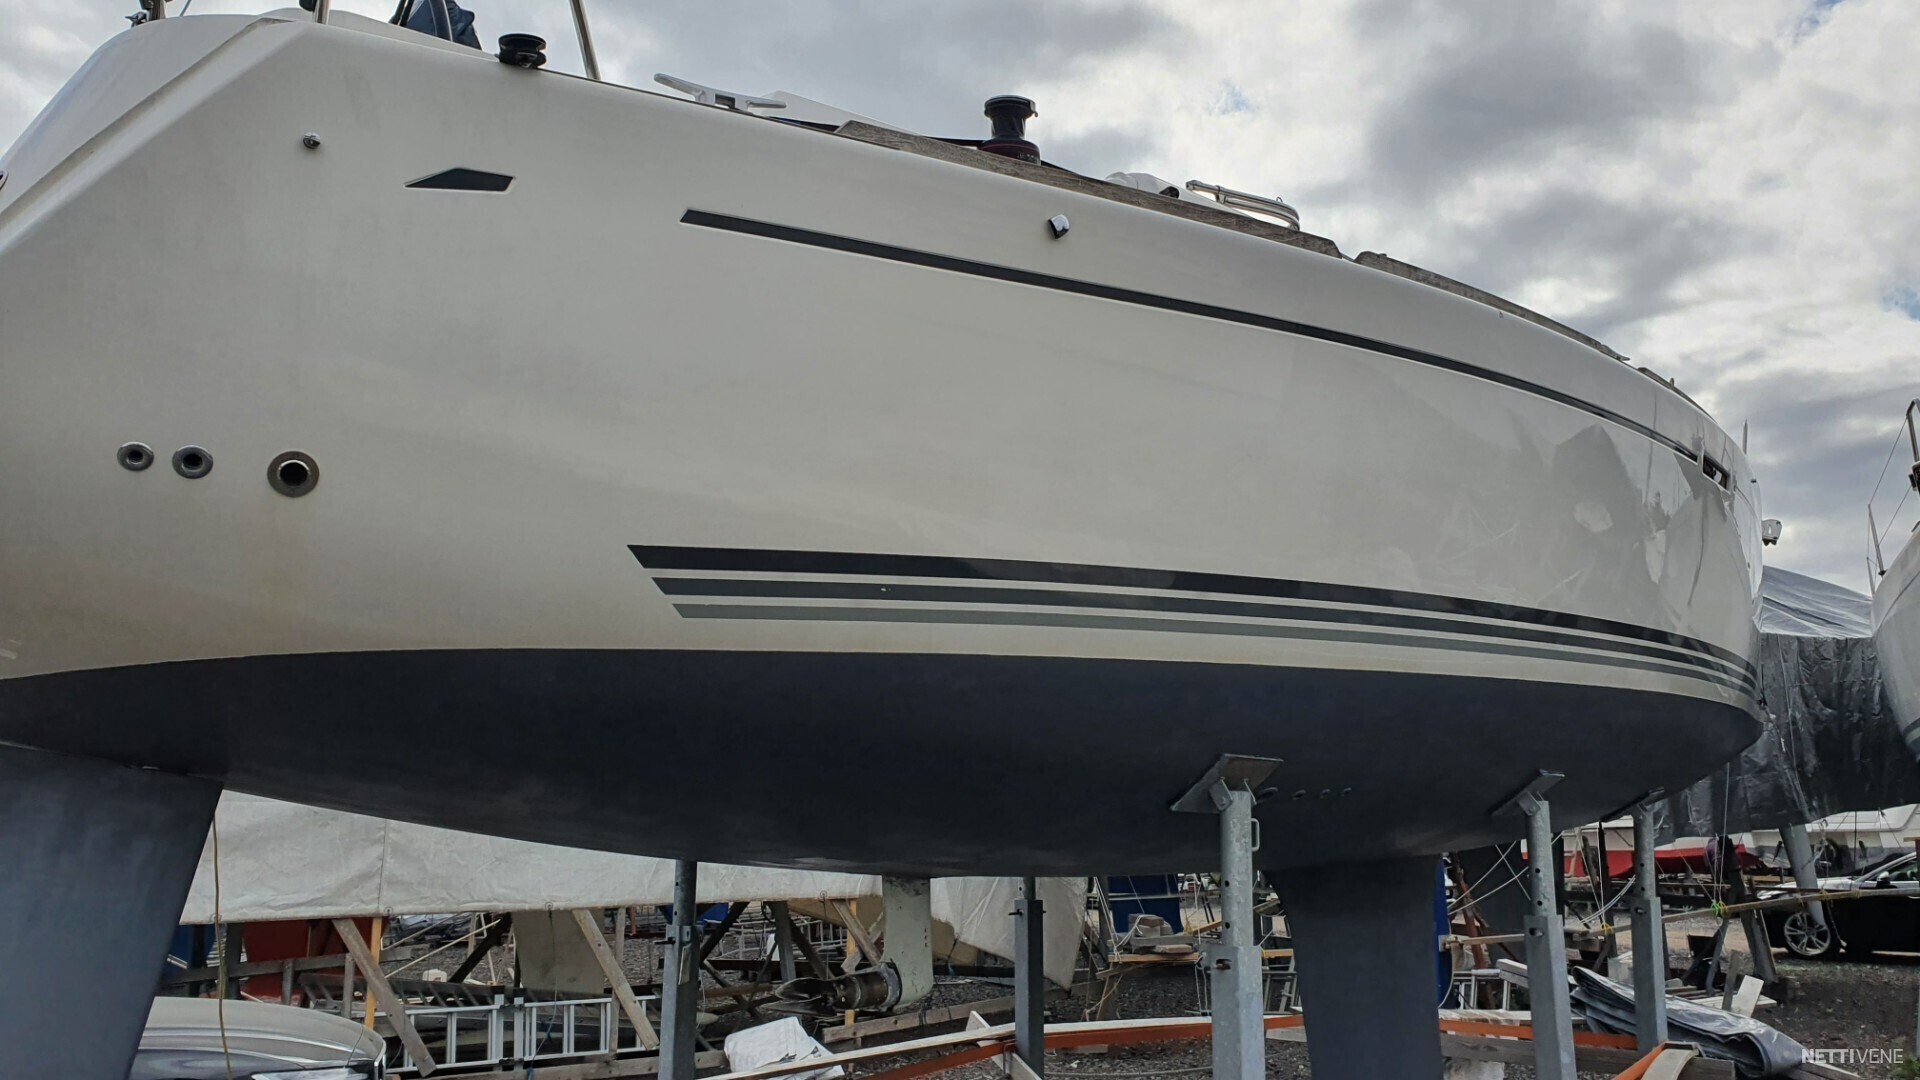 Dufour 34E: Prices, Specs, Reviews and Sales Information - itBoat